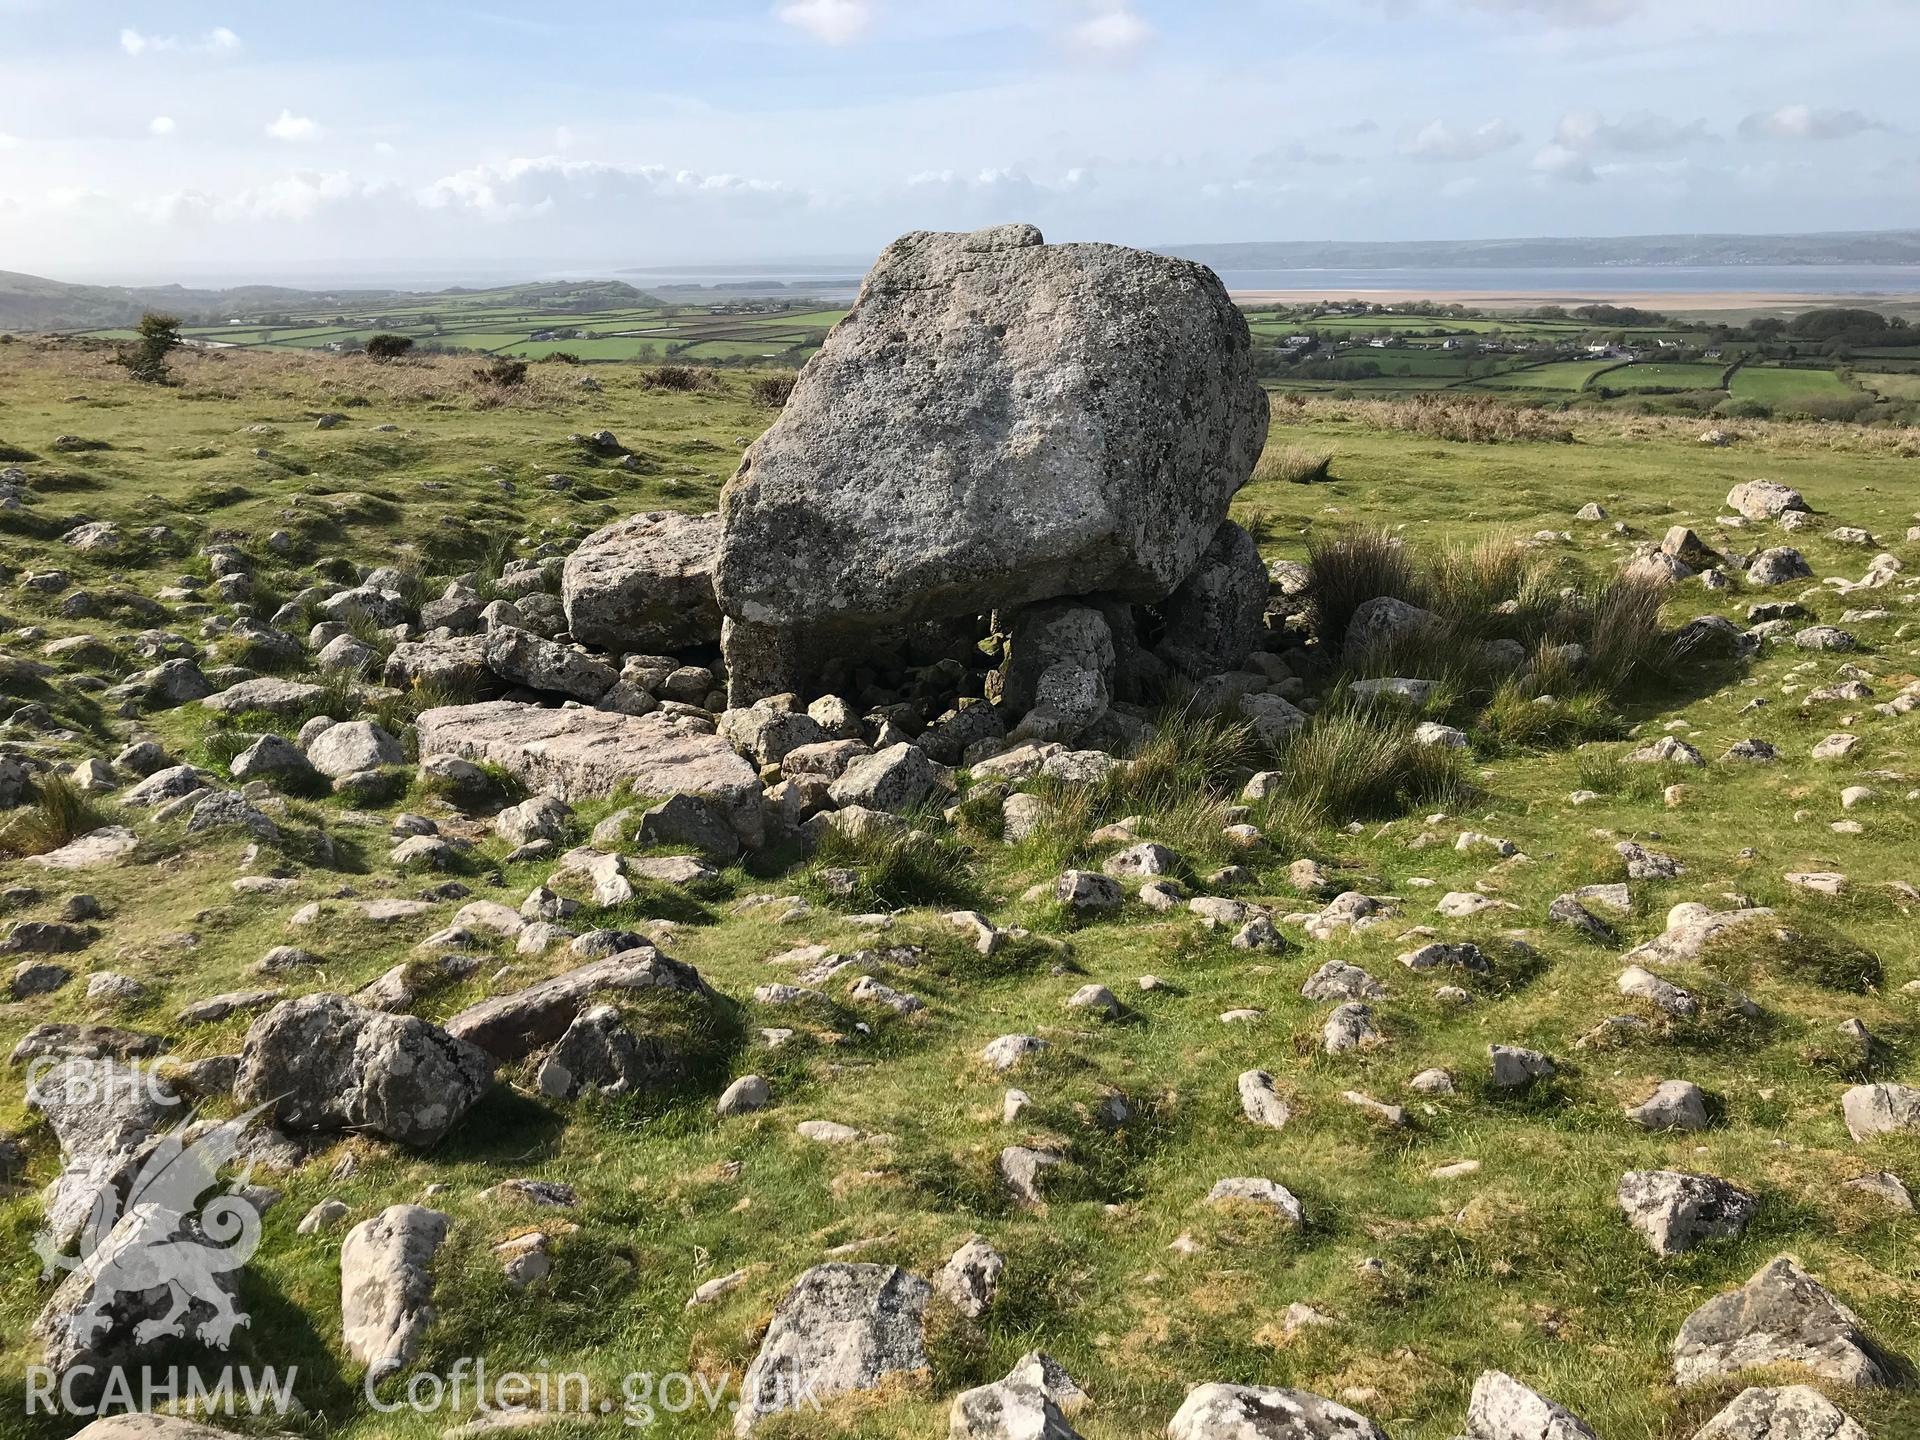 Colour photo showing Arthur's Stone Burial Chamber, taken by Paul R. Davis, 10th May 2018.